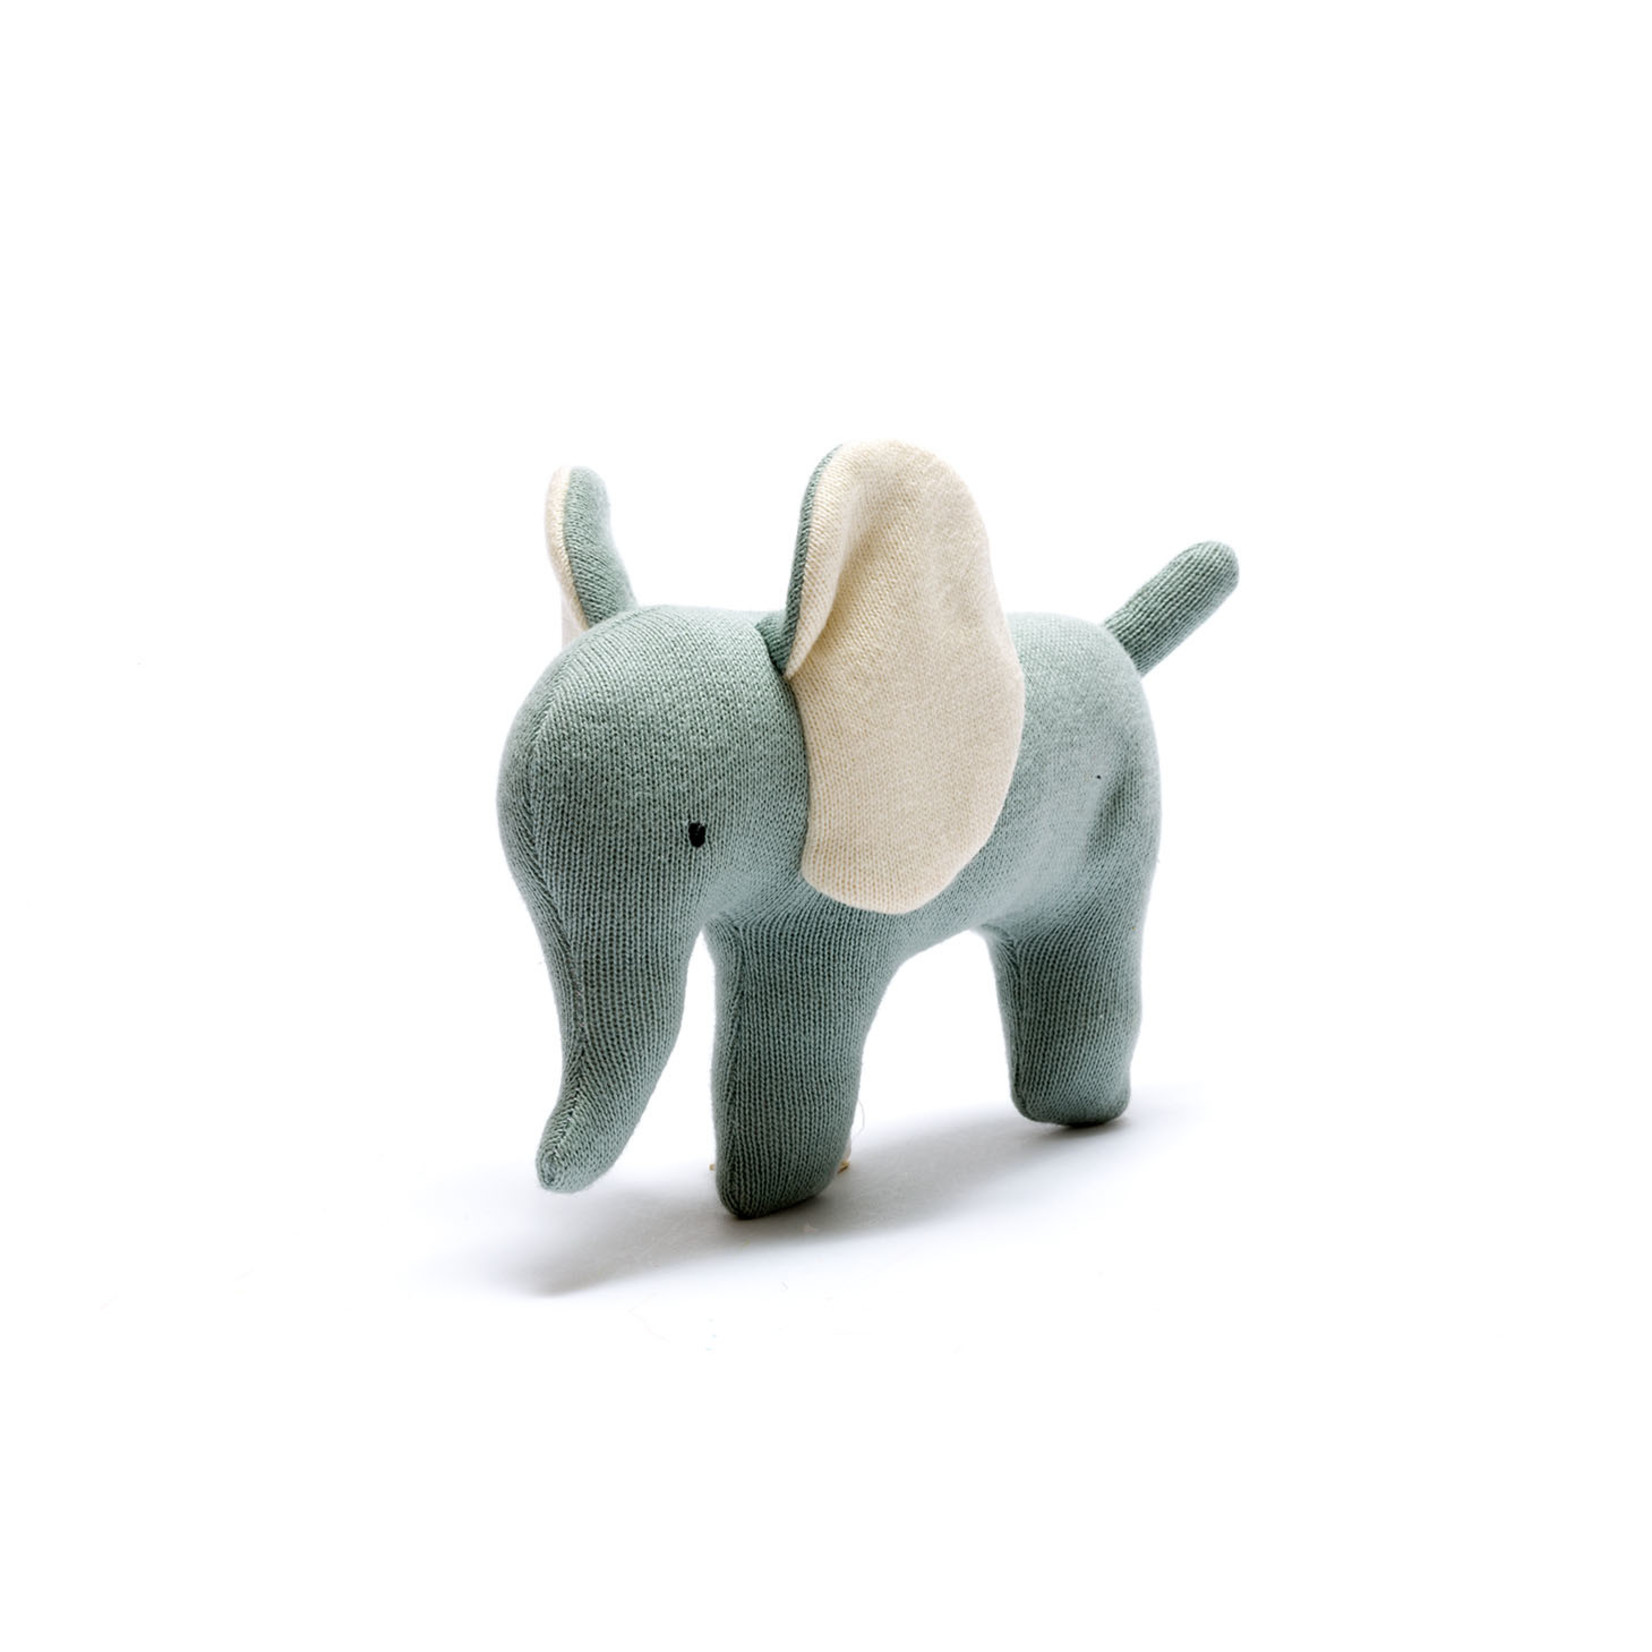 Small Teal Elephant Plush Toy